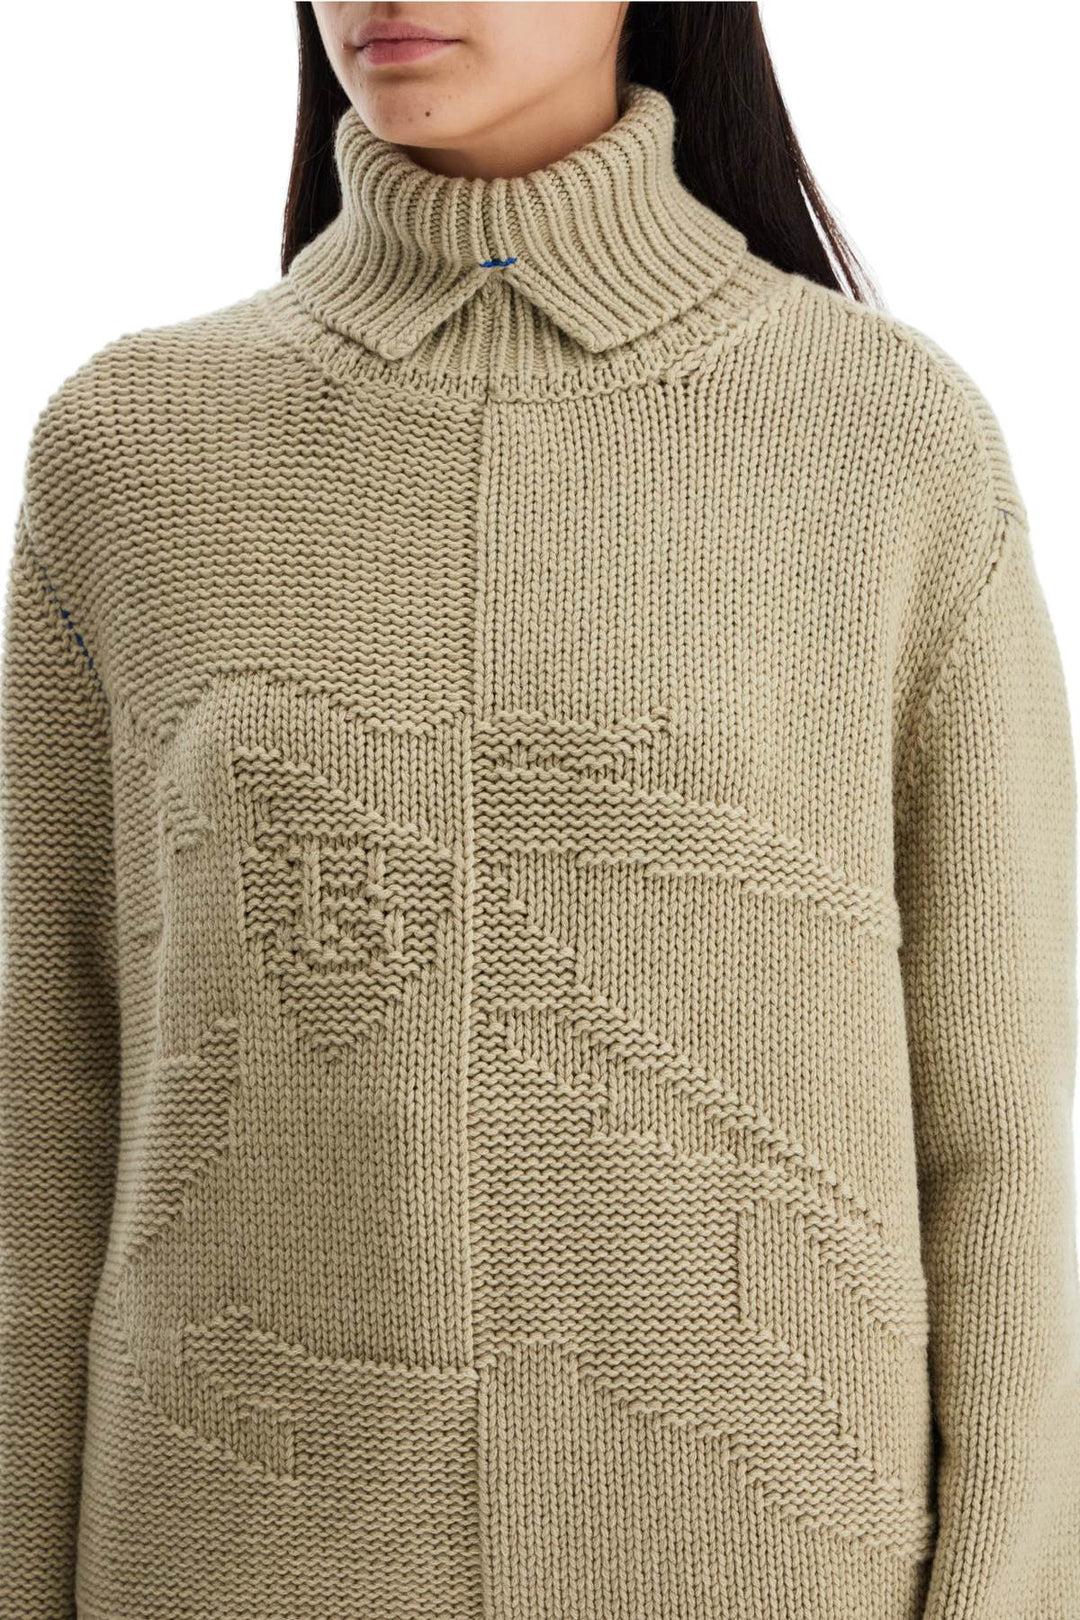 Burberry Cashmere Sweater With Ekd Design   Neutral